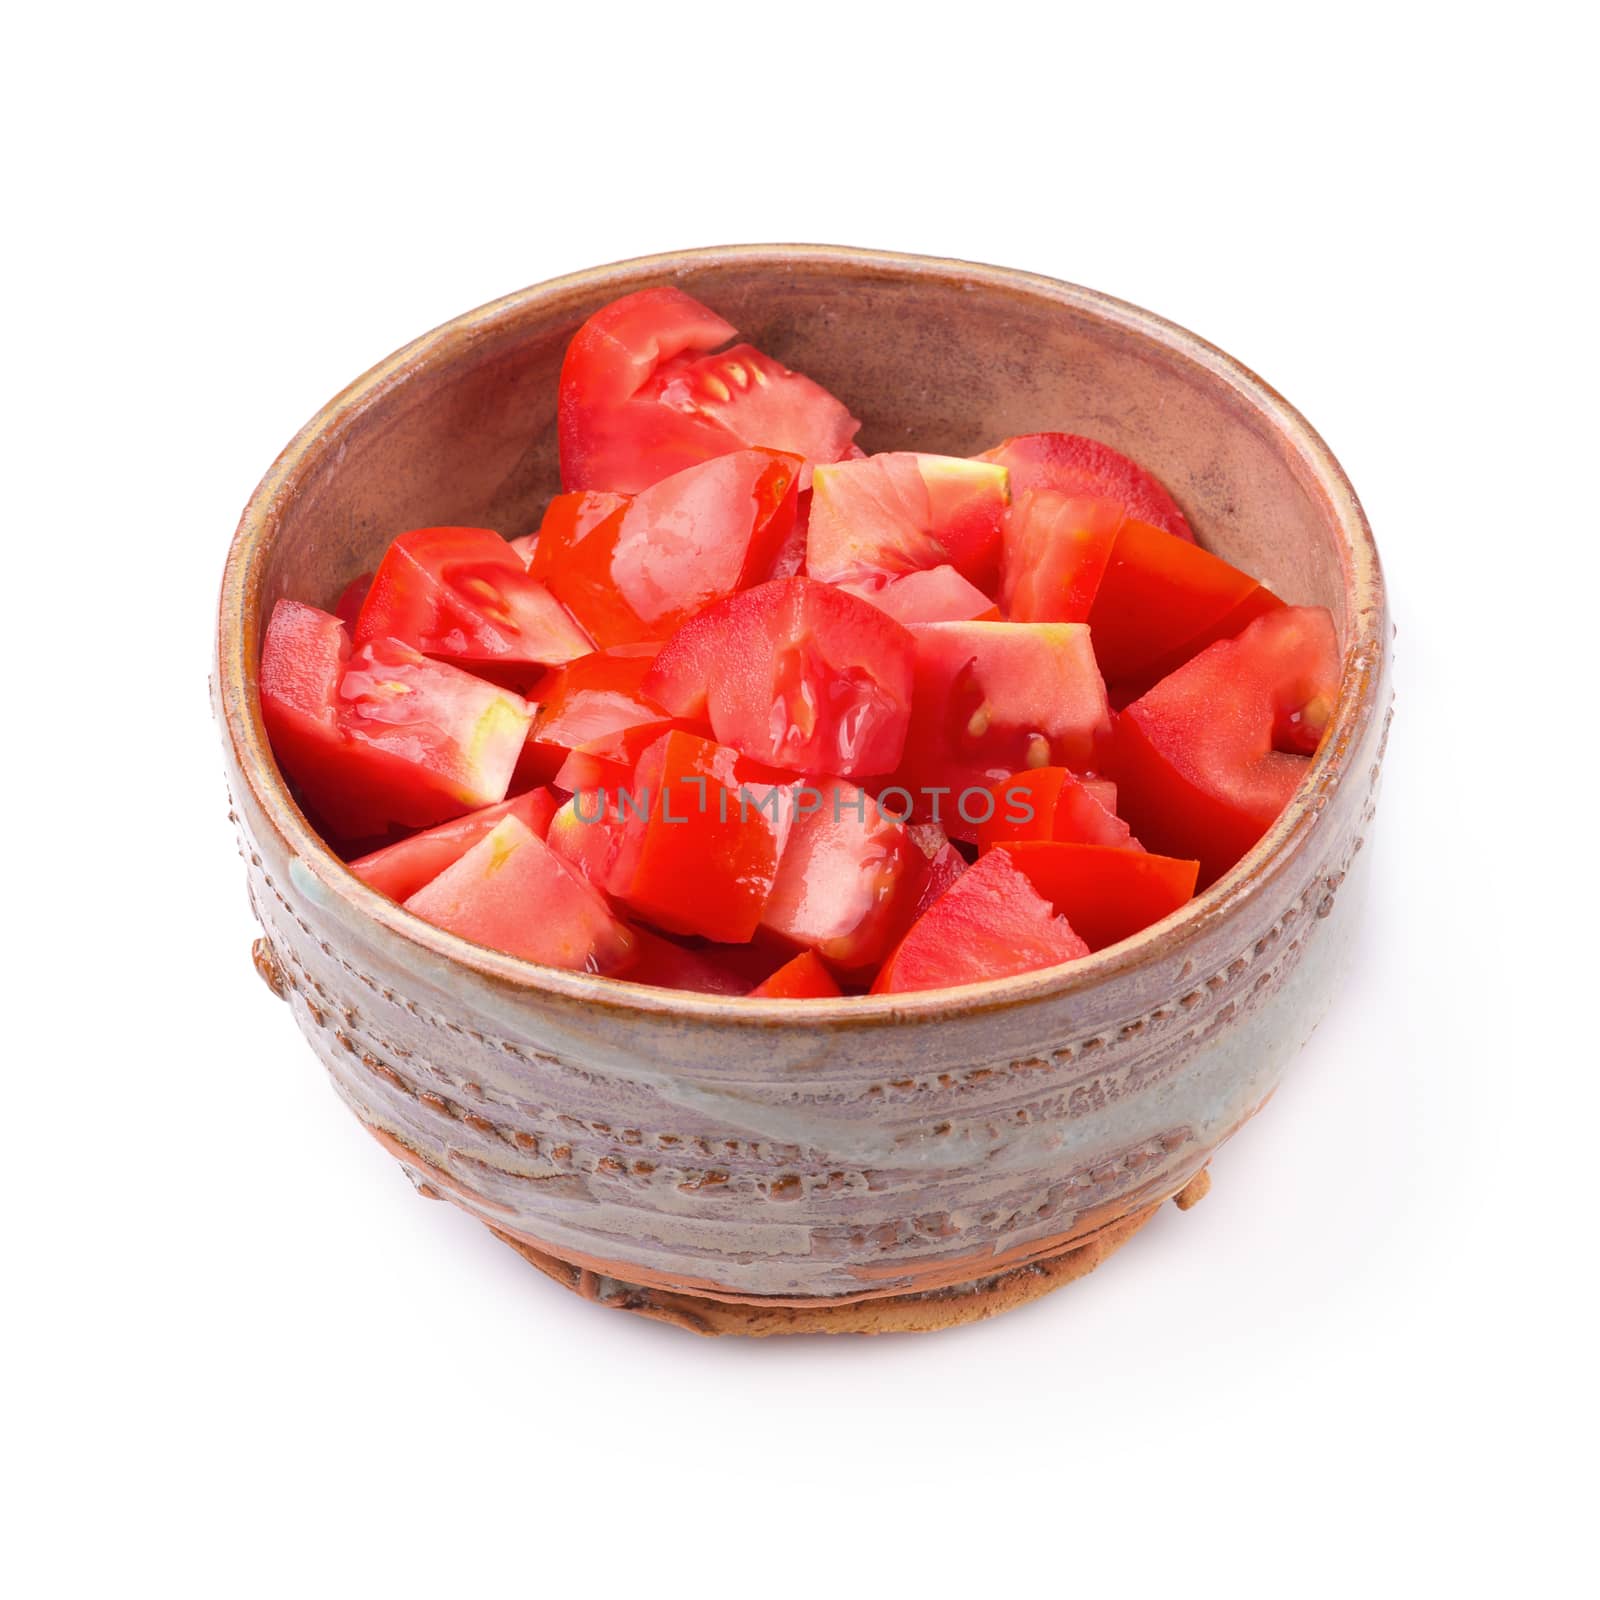 Chopped tomatoes in a bowl isolated on a white background.